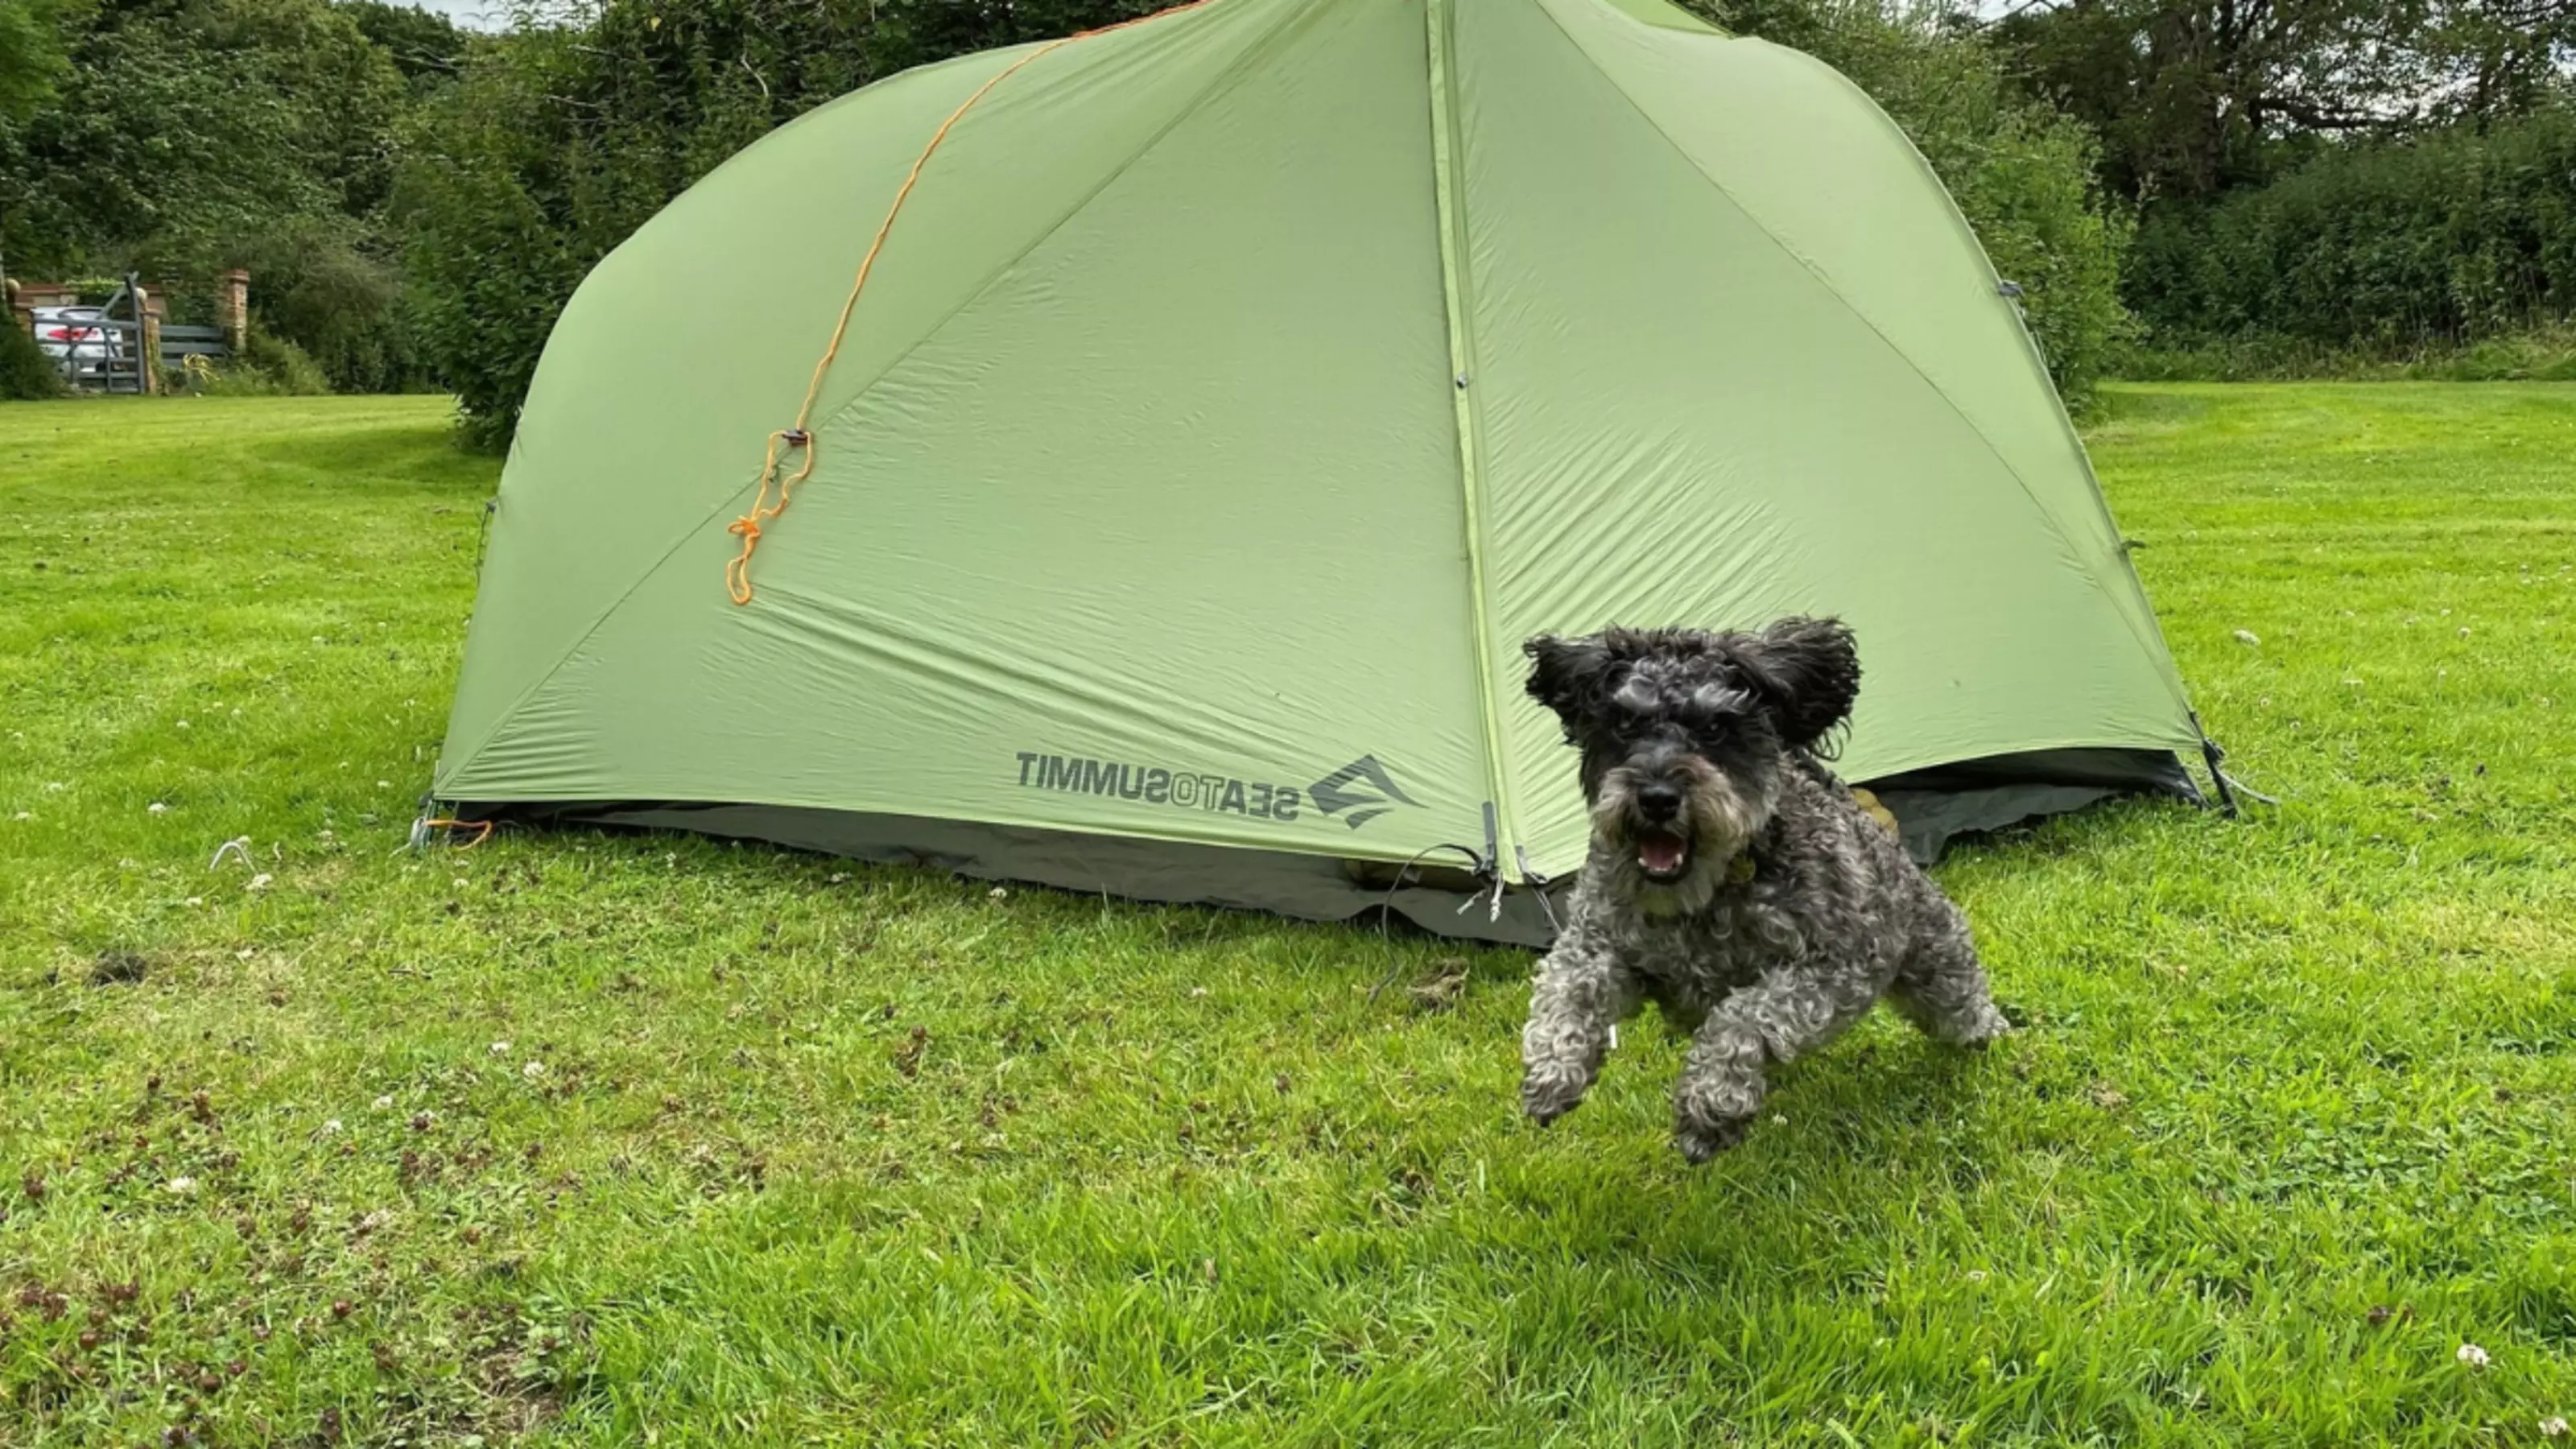 Small grey dog running in front of a green tent in a field